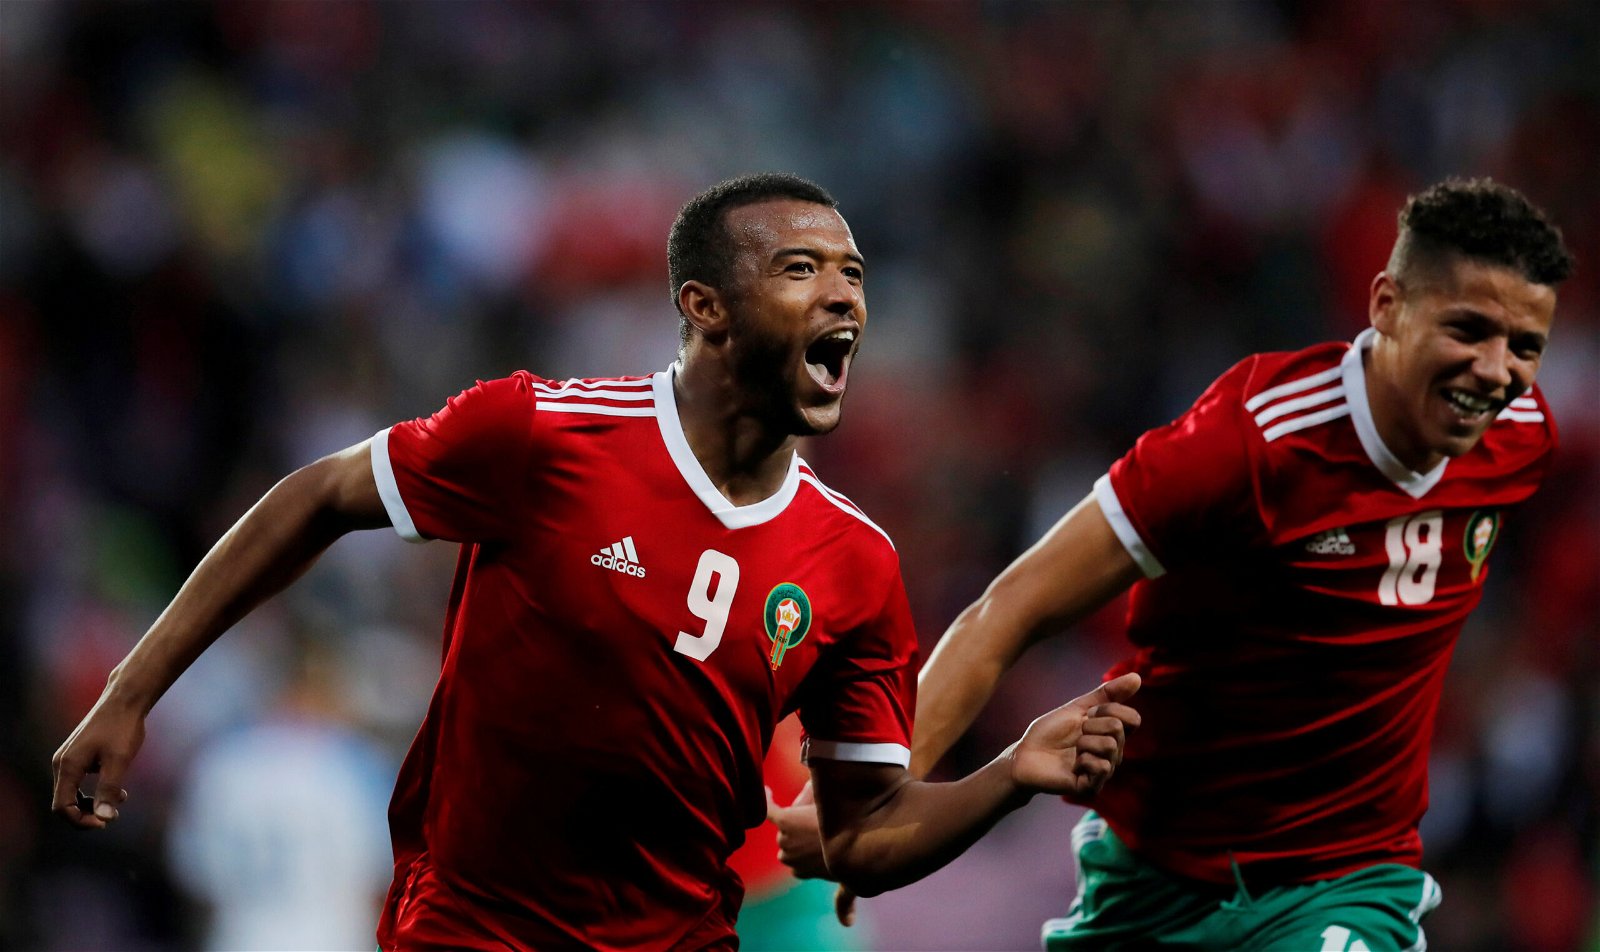 Morocco's best player in the World Cup qualifier Ayoub El Kaabi